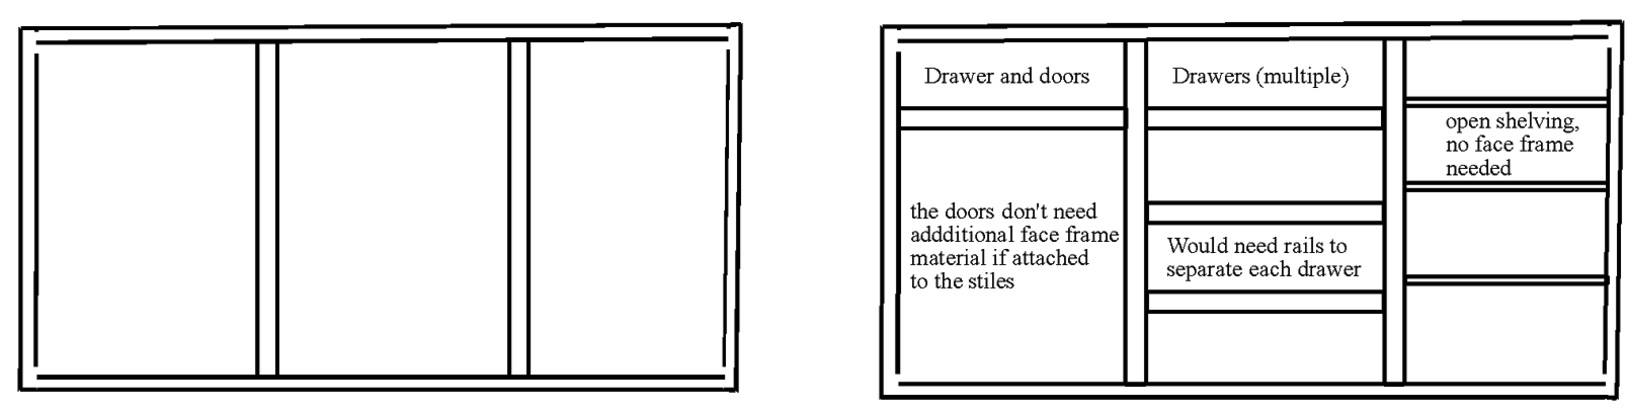 cabinet, division, drawing